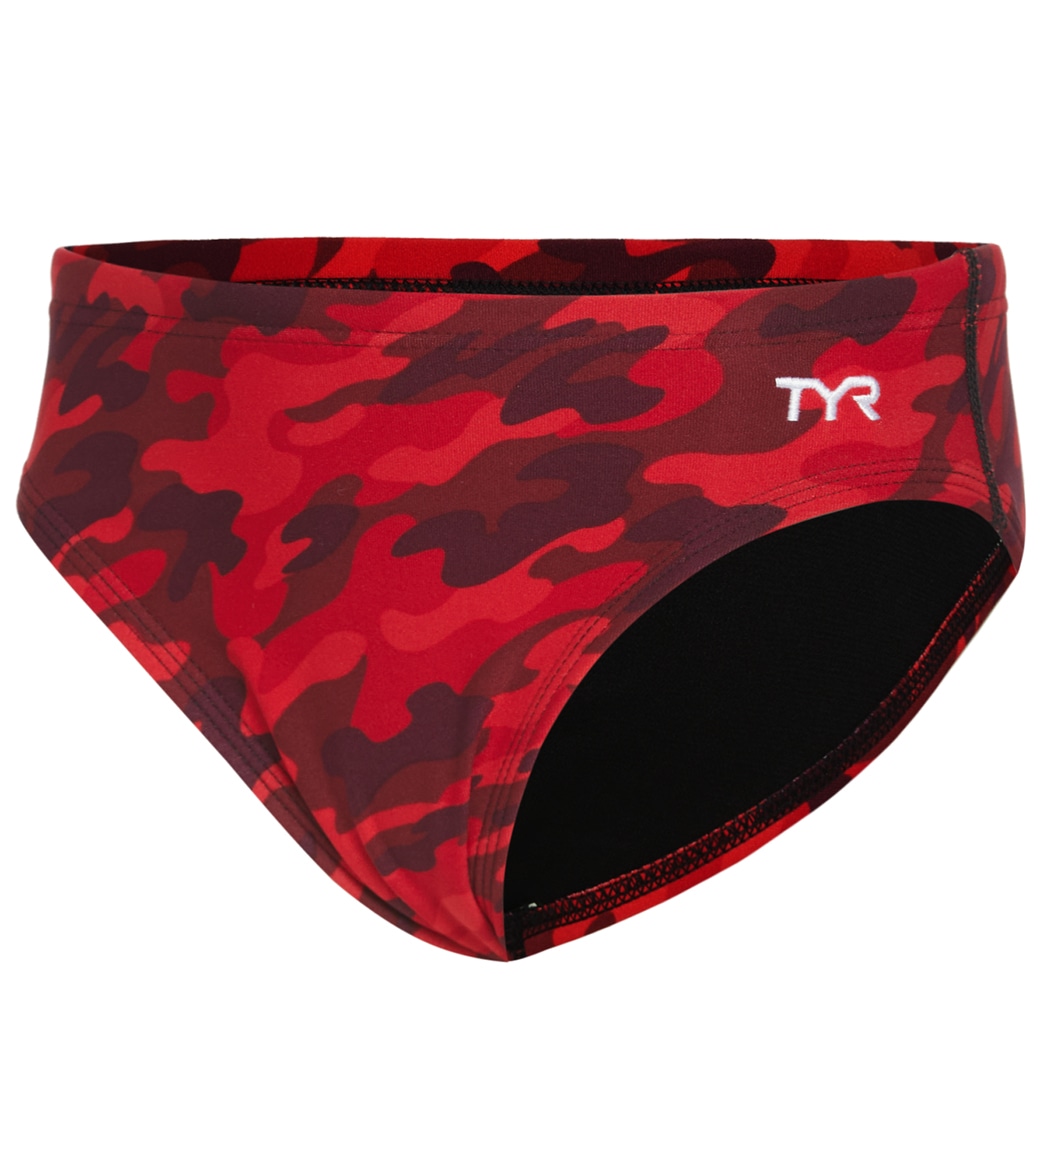 TYR Boys' Camo Racer Brief Swimsuit - Red 22 Polyester - Swimoutlet.com